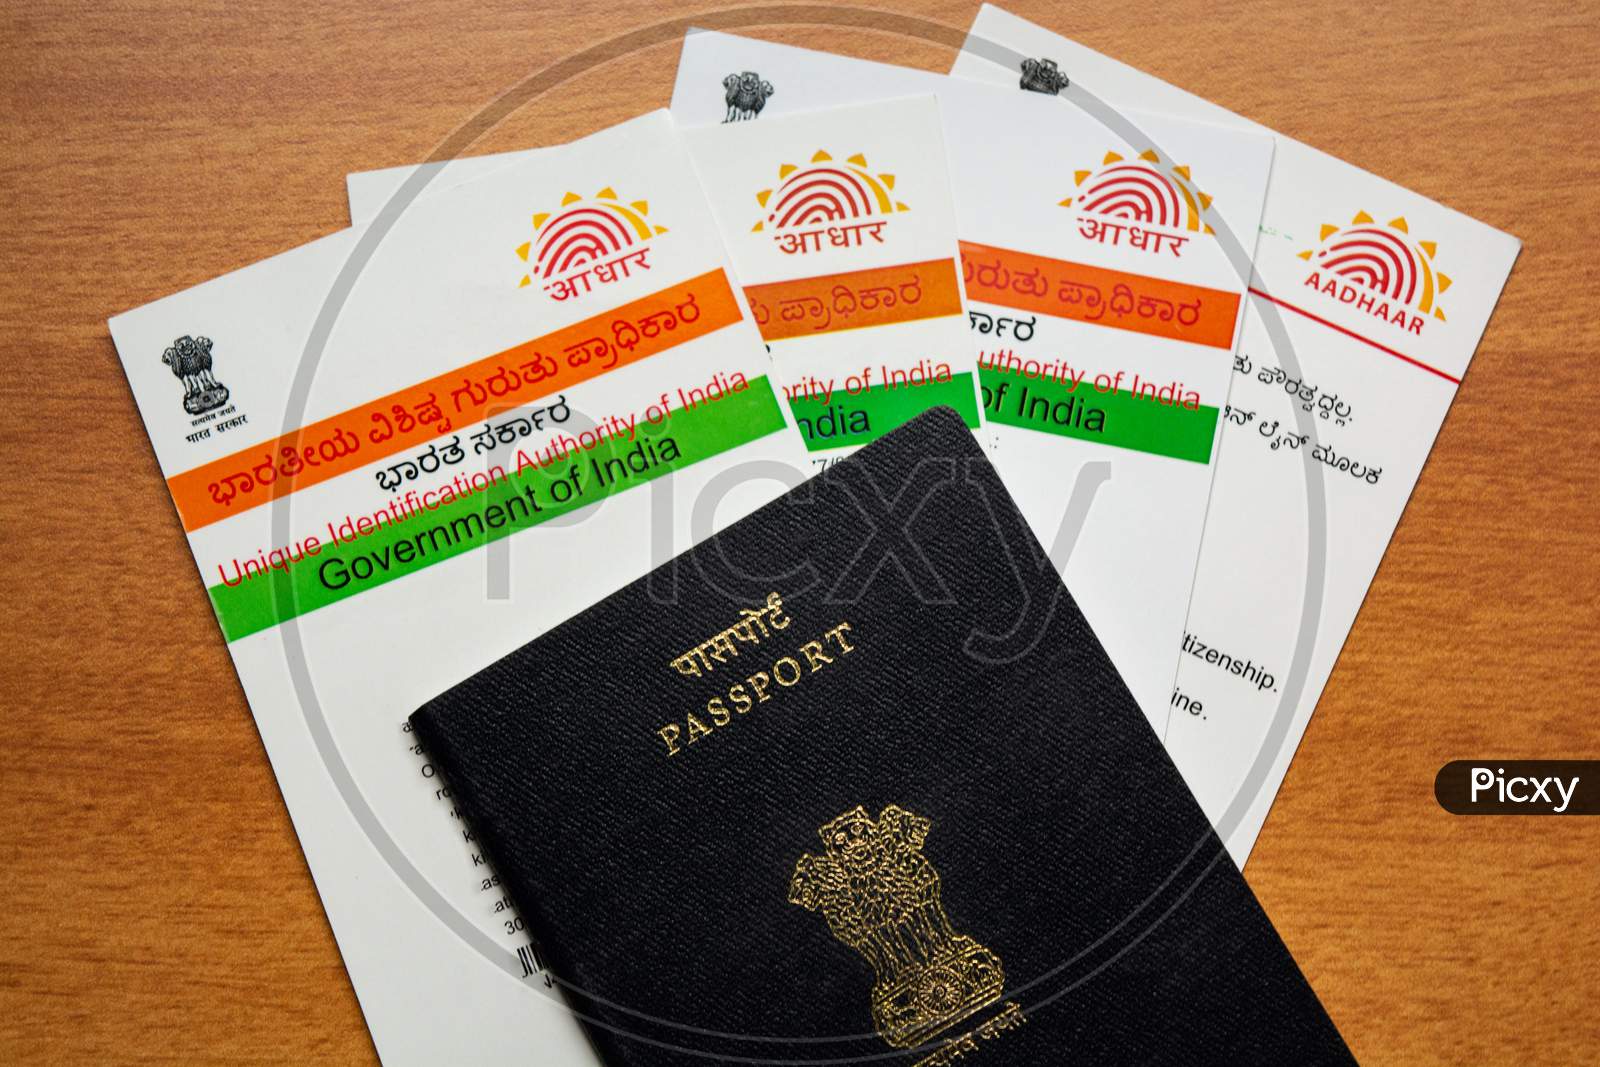 Aadhaar Card And Passport Which Is Issued By Government Of India As An Identity Card To Travel Foreign.